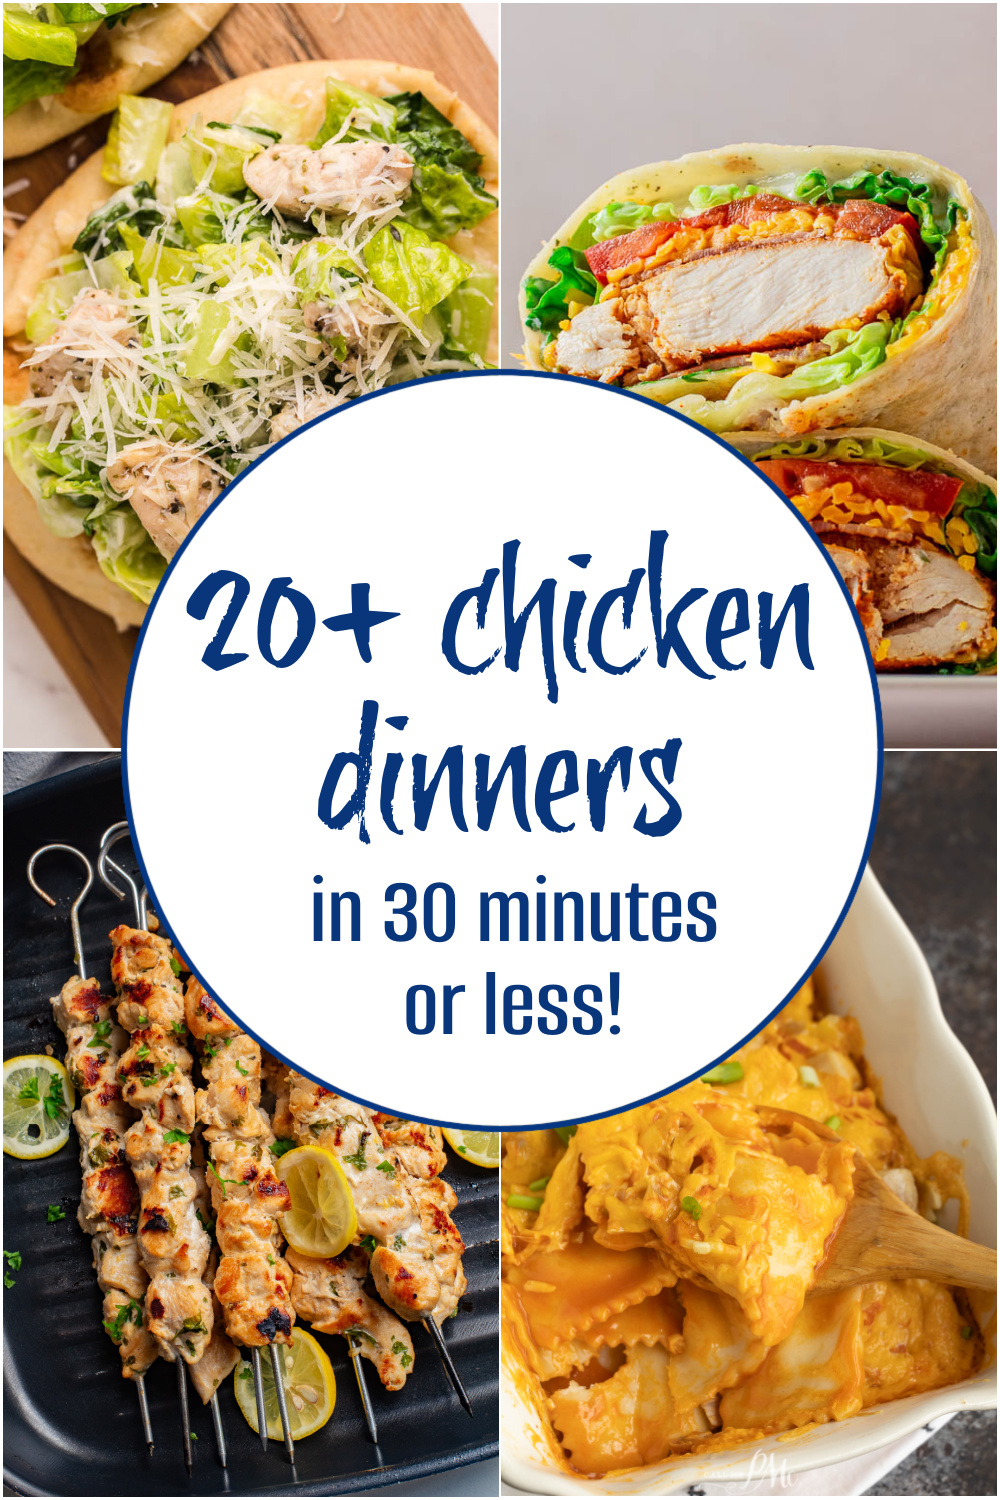 20 chicken dinners in 30 minutes or less.